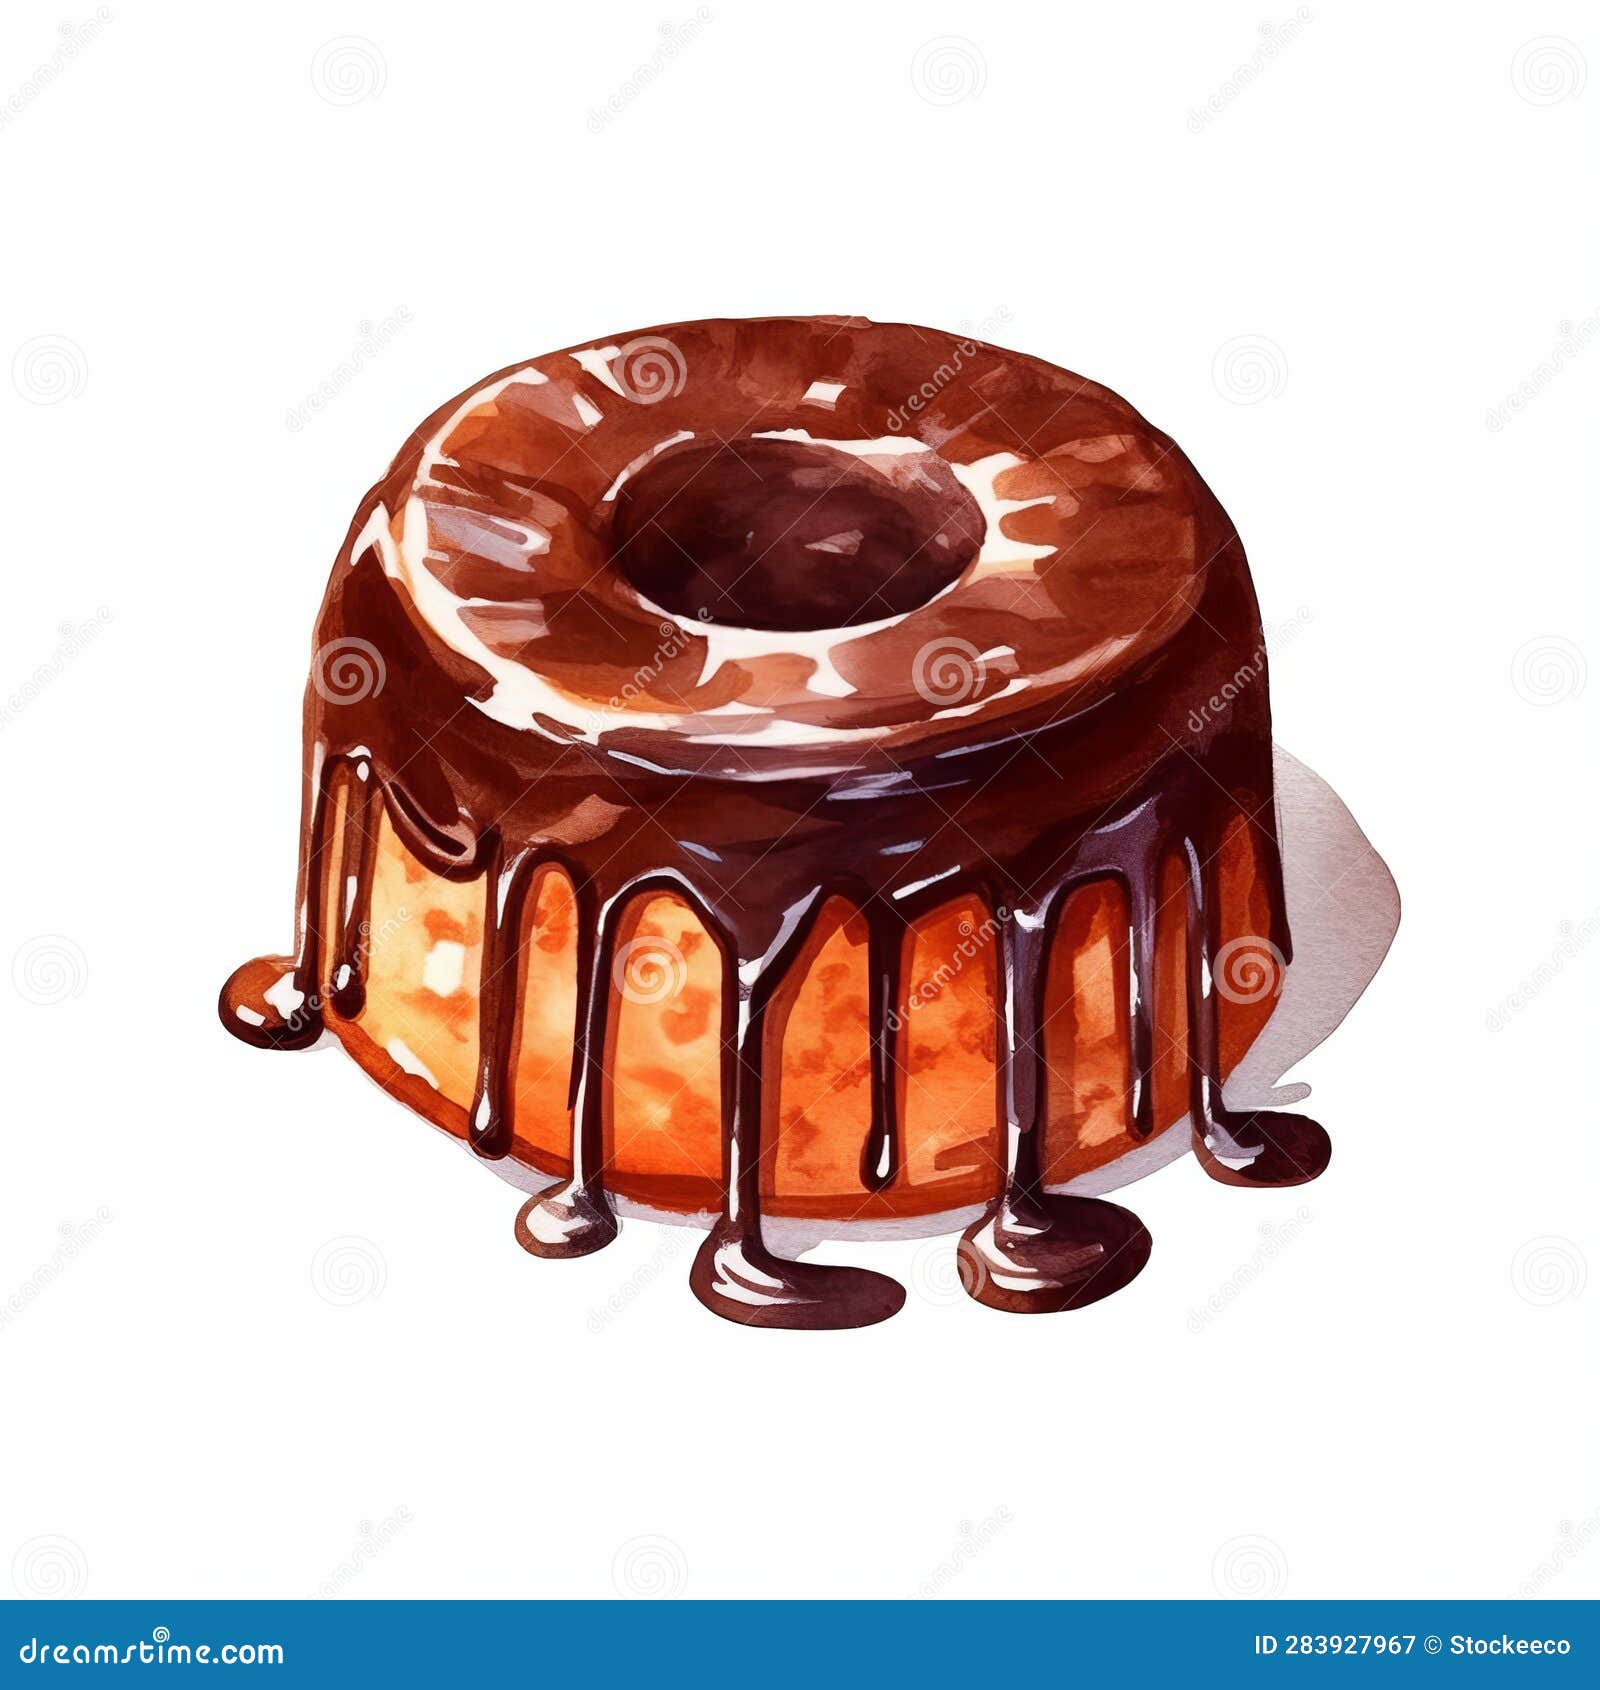 Chocolate Cake with Watercolor Dripping - 2d Game Art Style Stock ...